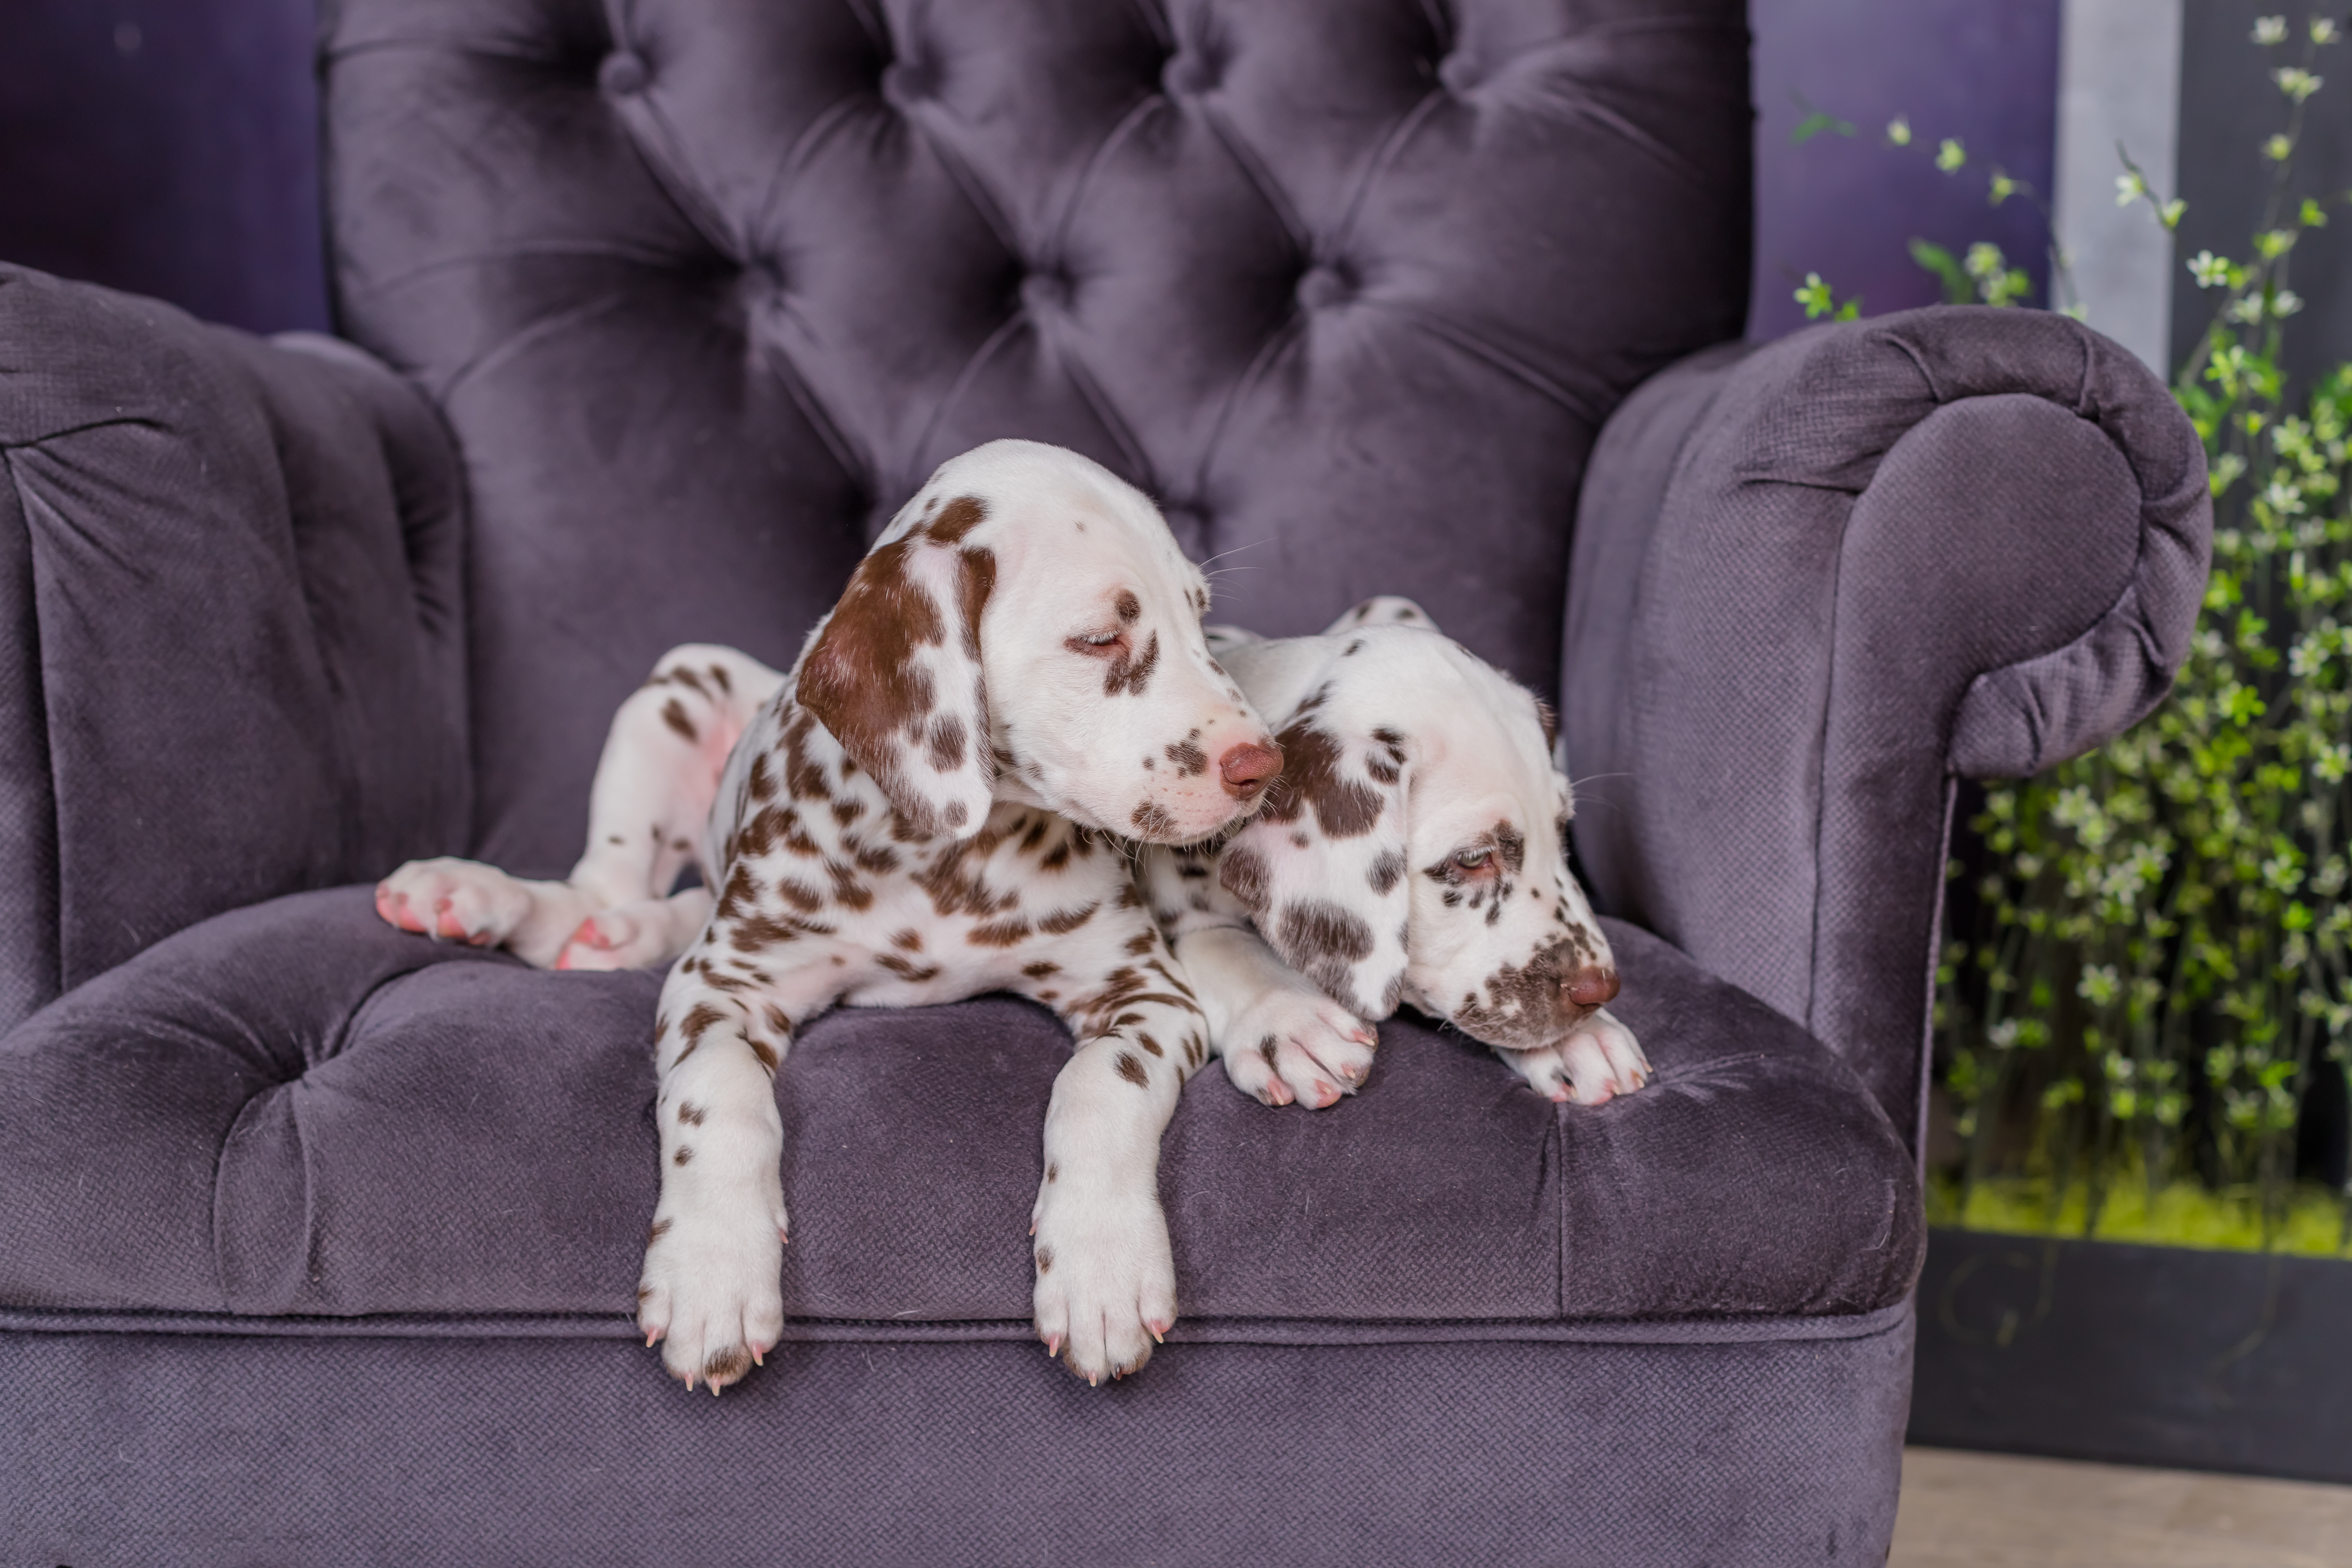 Two Dalmatian puppies on a chair